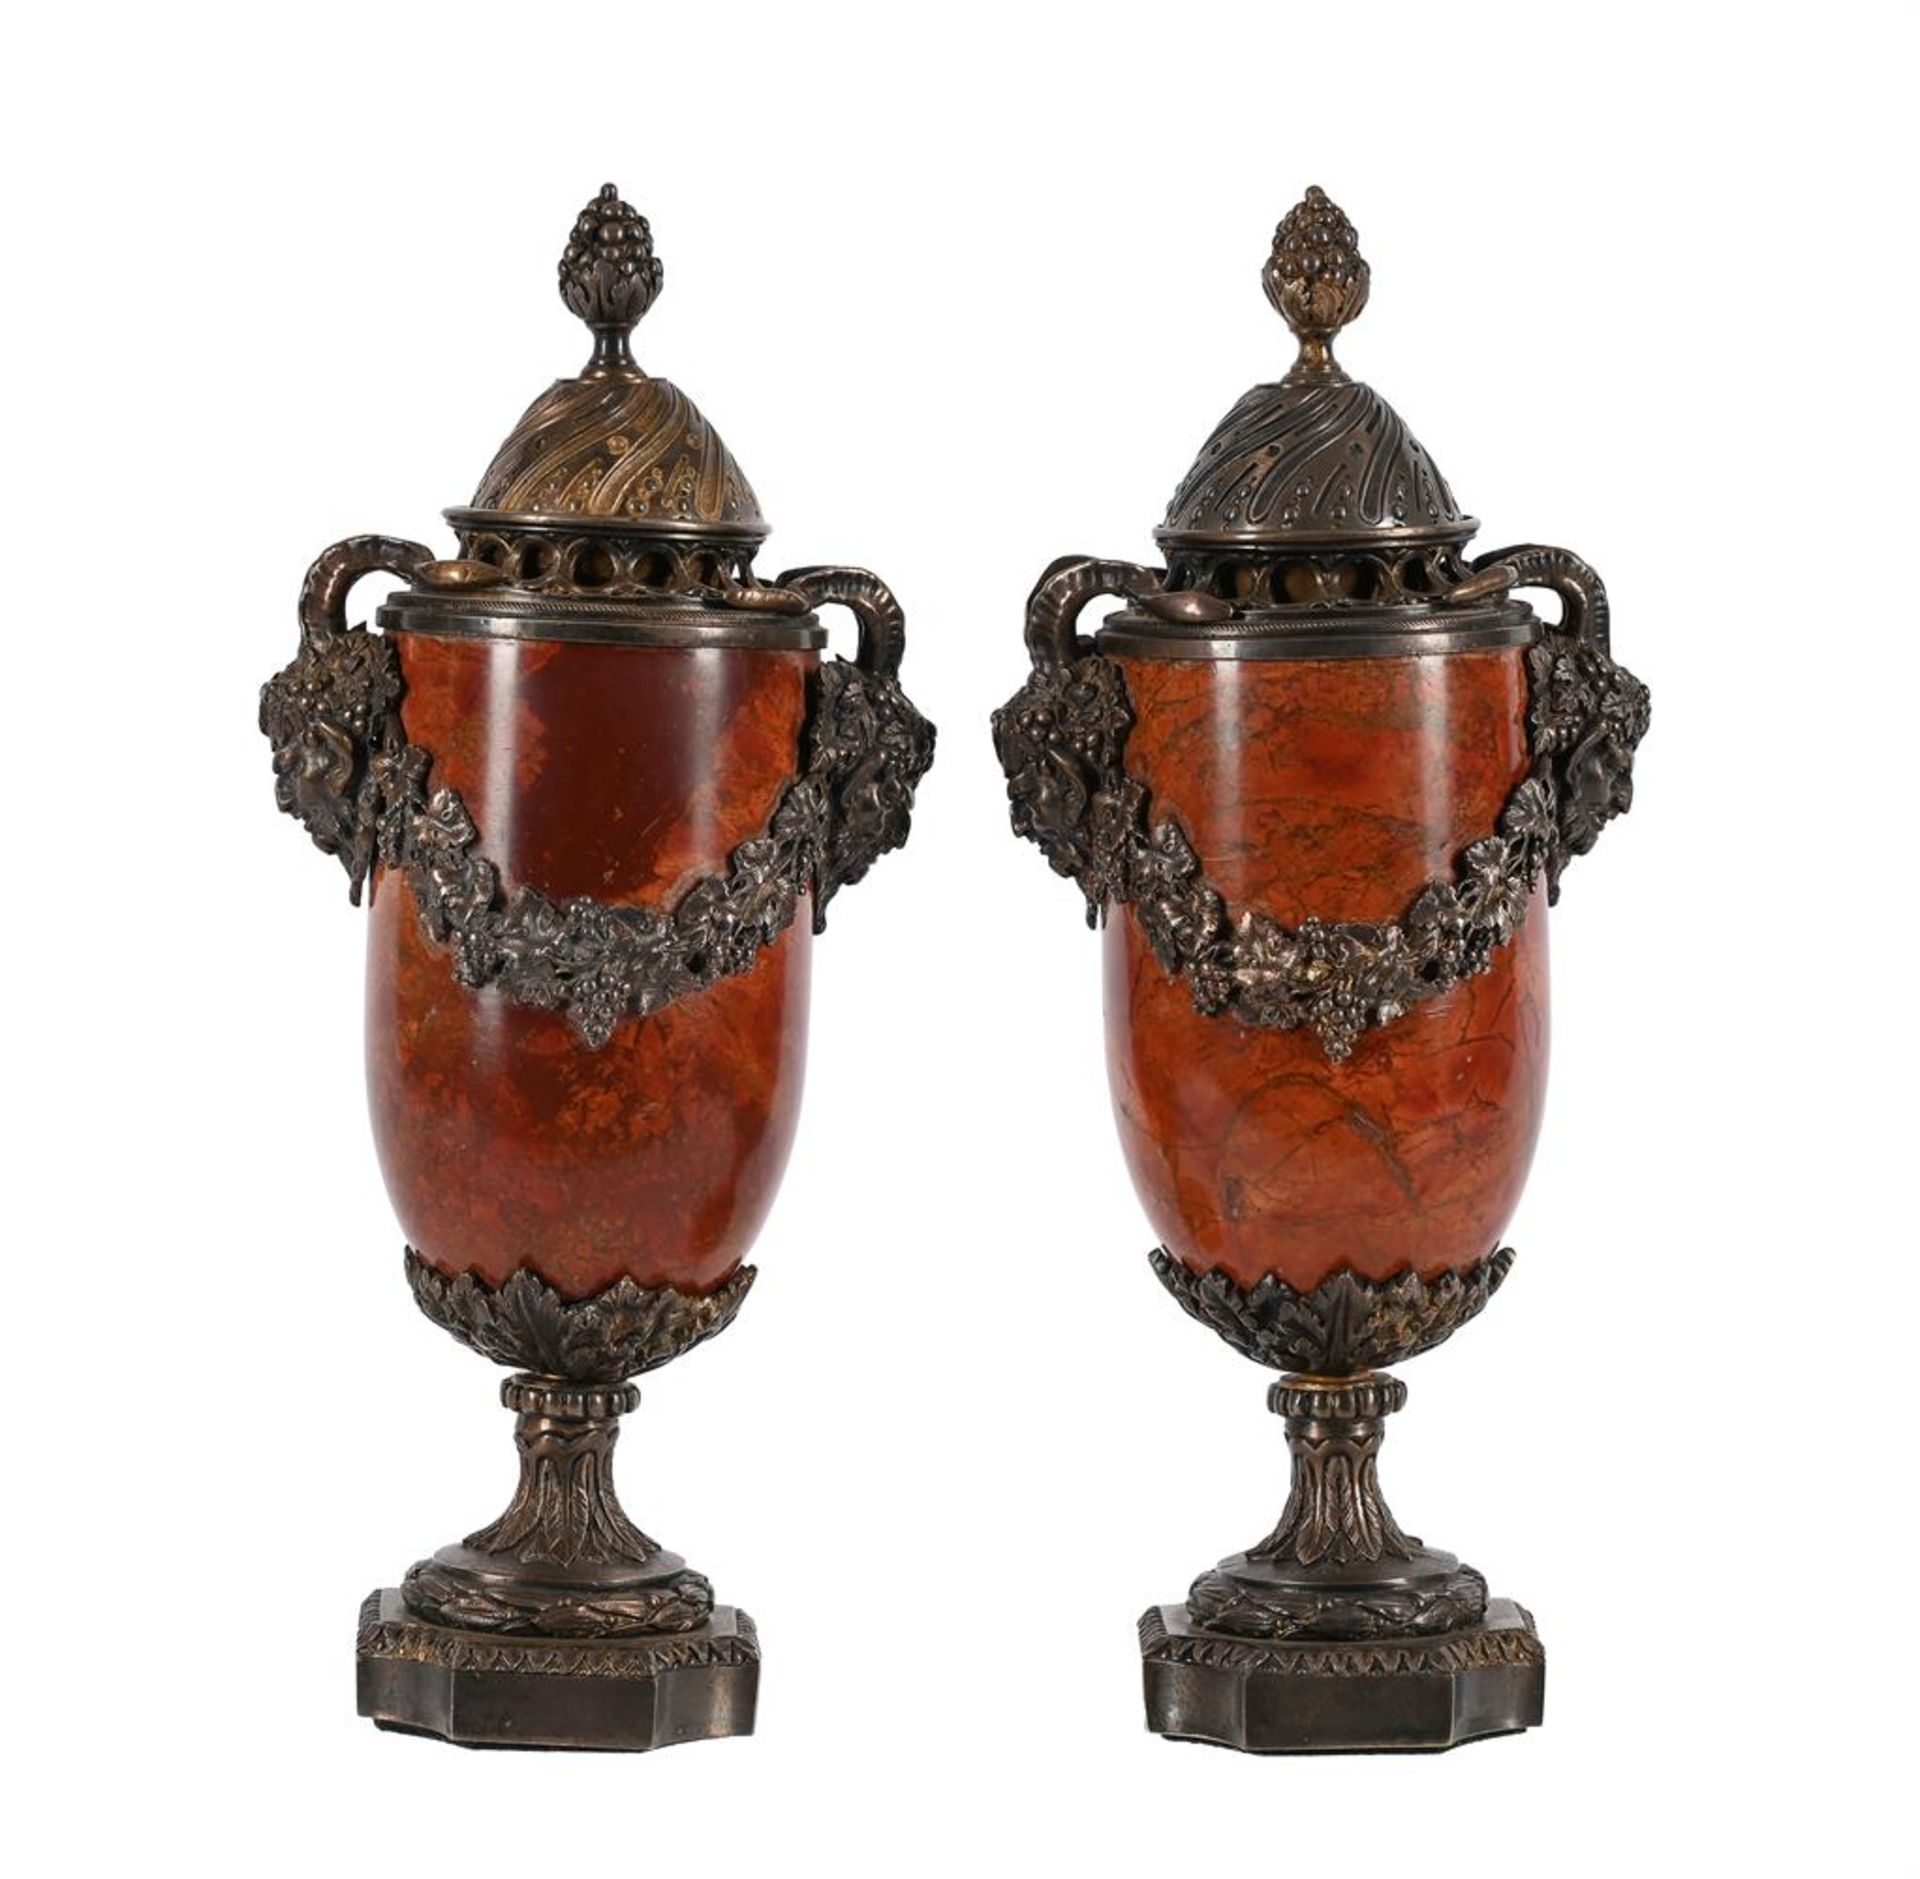 A PAIR OF GILT AND SILVERED METAL MOUNTED RED MARBLE LIDDED URNS